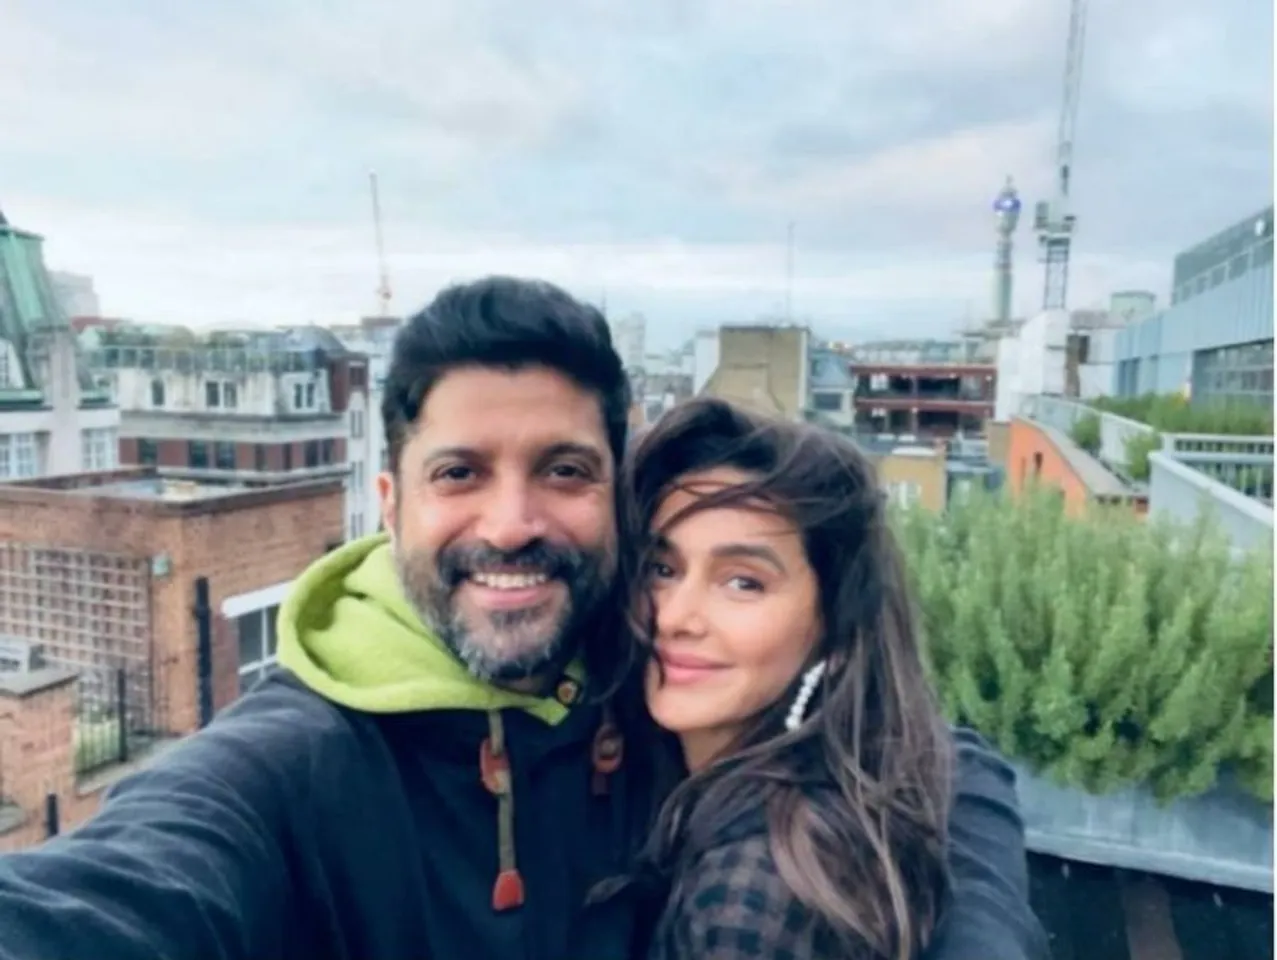 Farhan Akhtar's Birthday Post For Shibani: "I’d Fight The Strongest Currents For You"